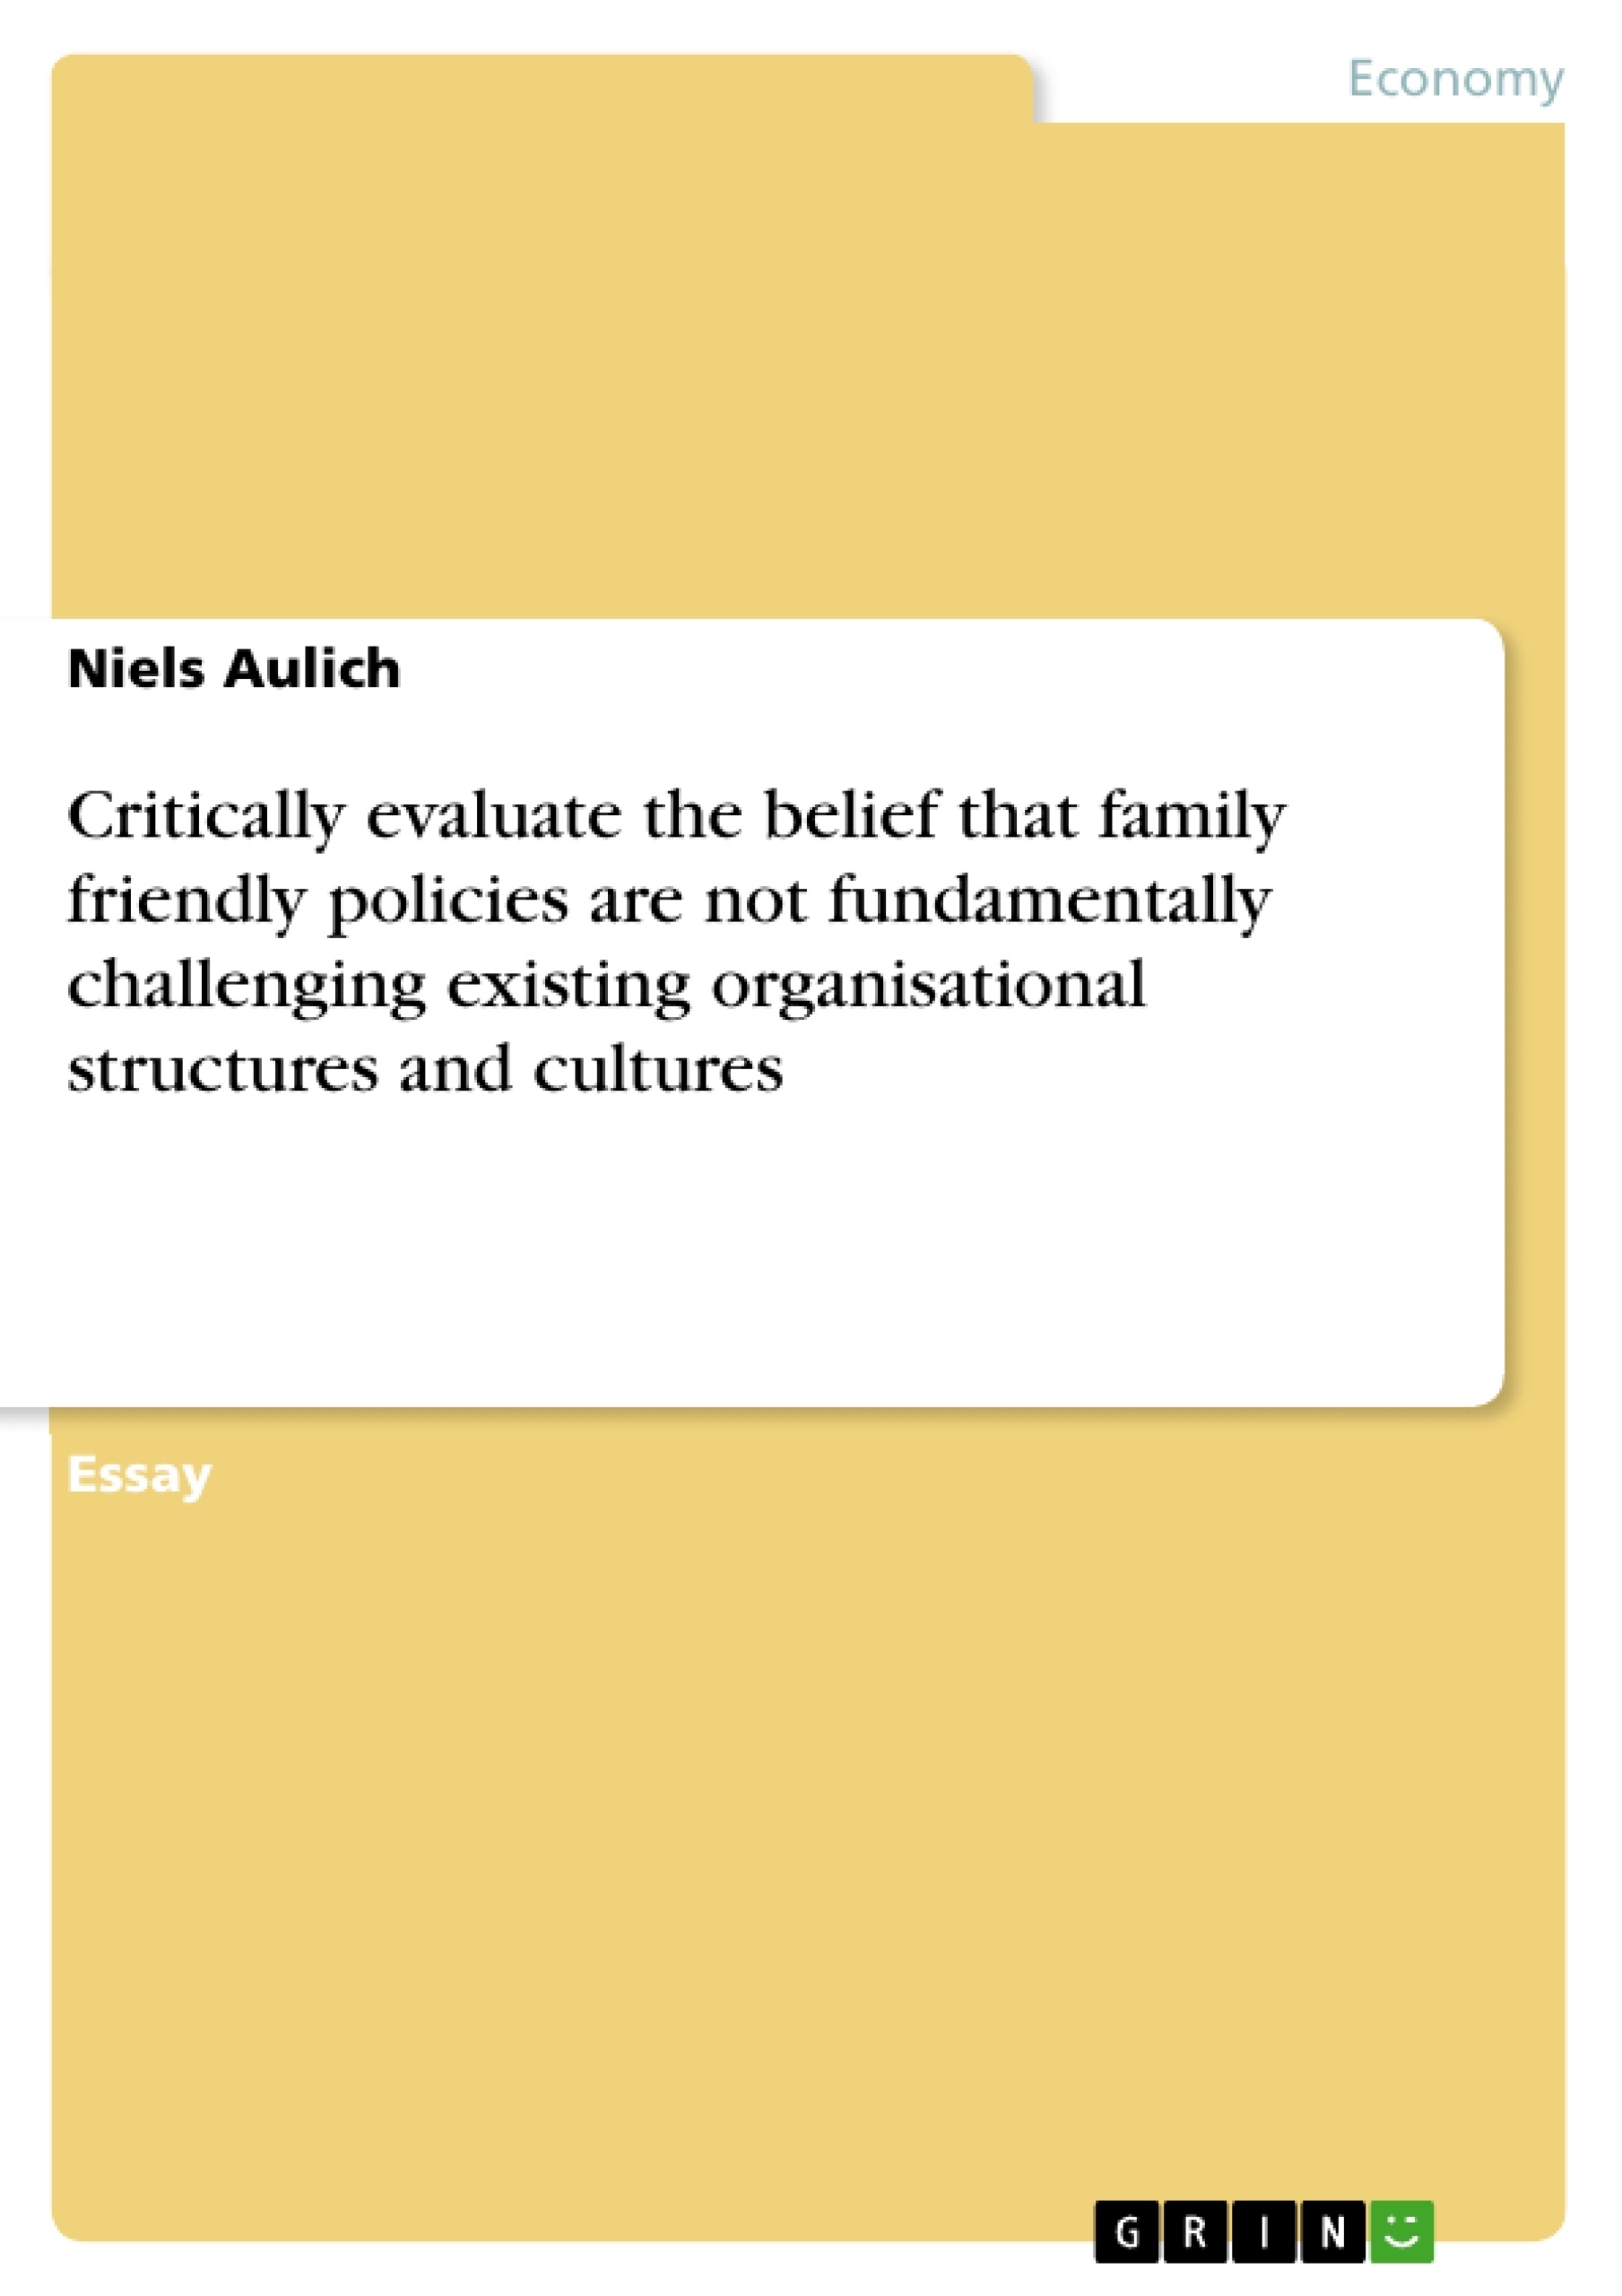 Title: Critically evaluate the belief that family friendly policies are not fundamentally challenging existing organisational structures and cultures